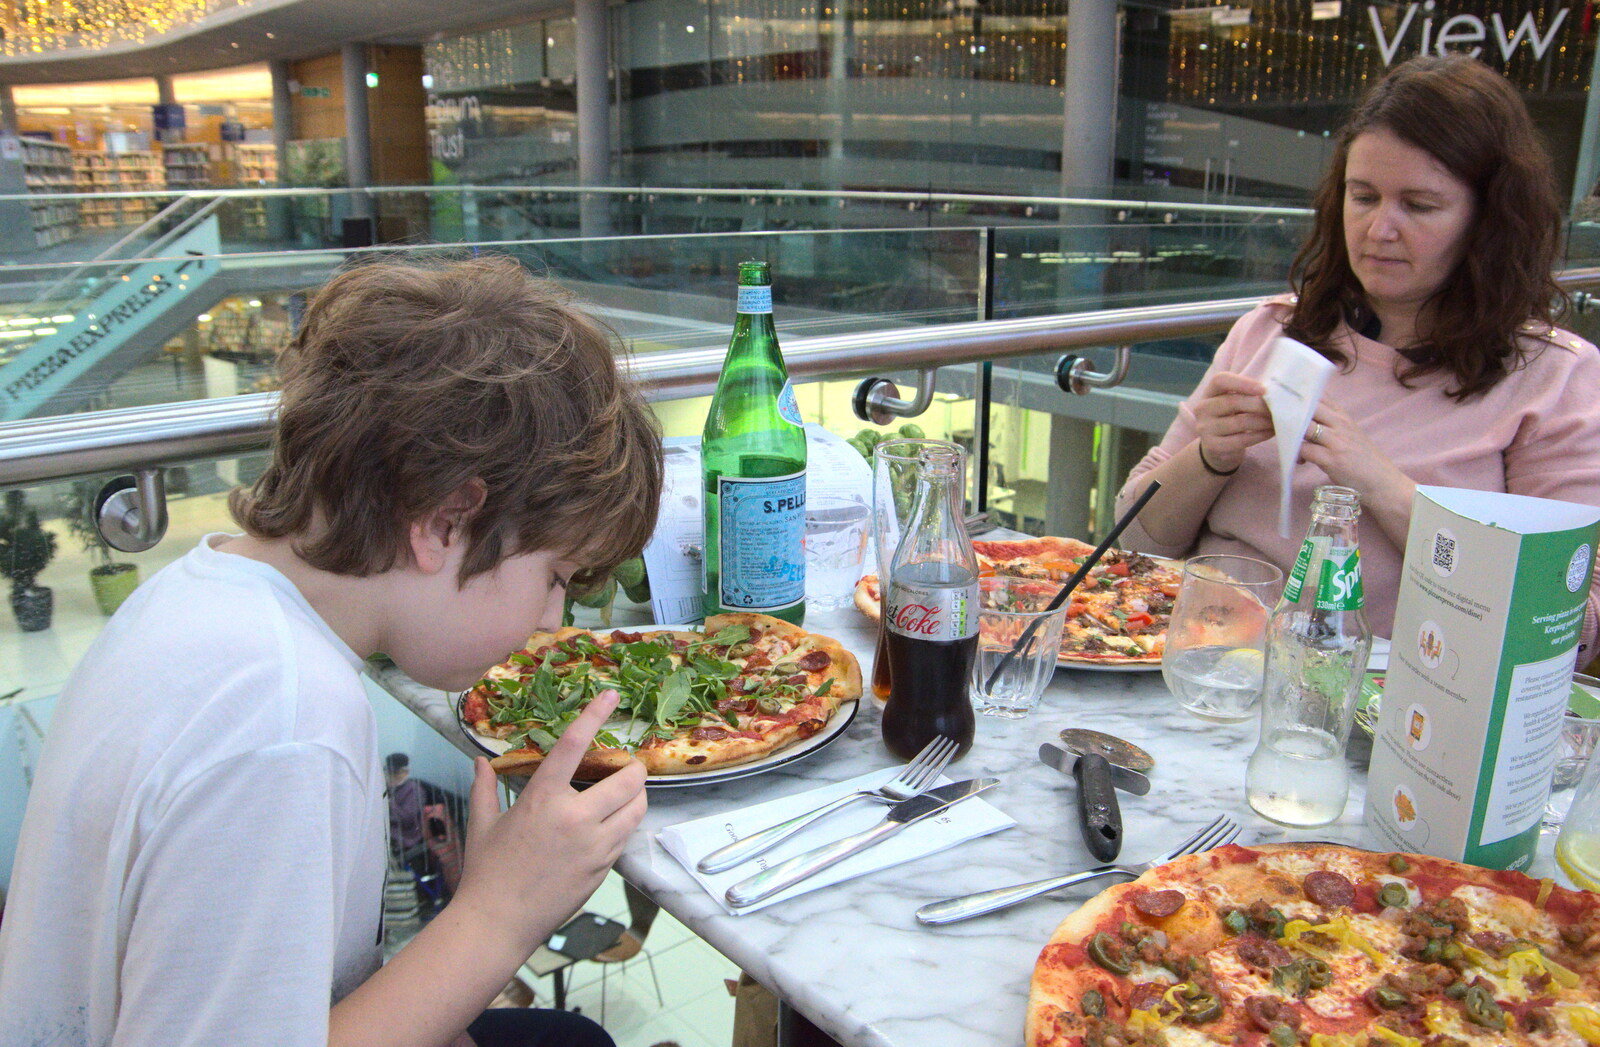 Fred tries to inhale his pizza from A Bit of Christmas Shopping, Norwich, Norfolk - 23rd December 2020